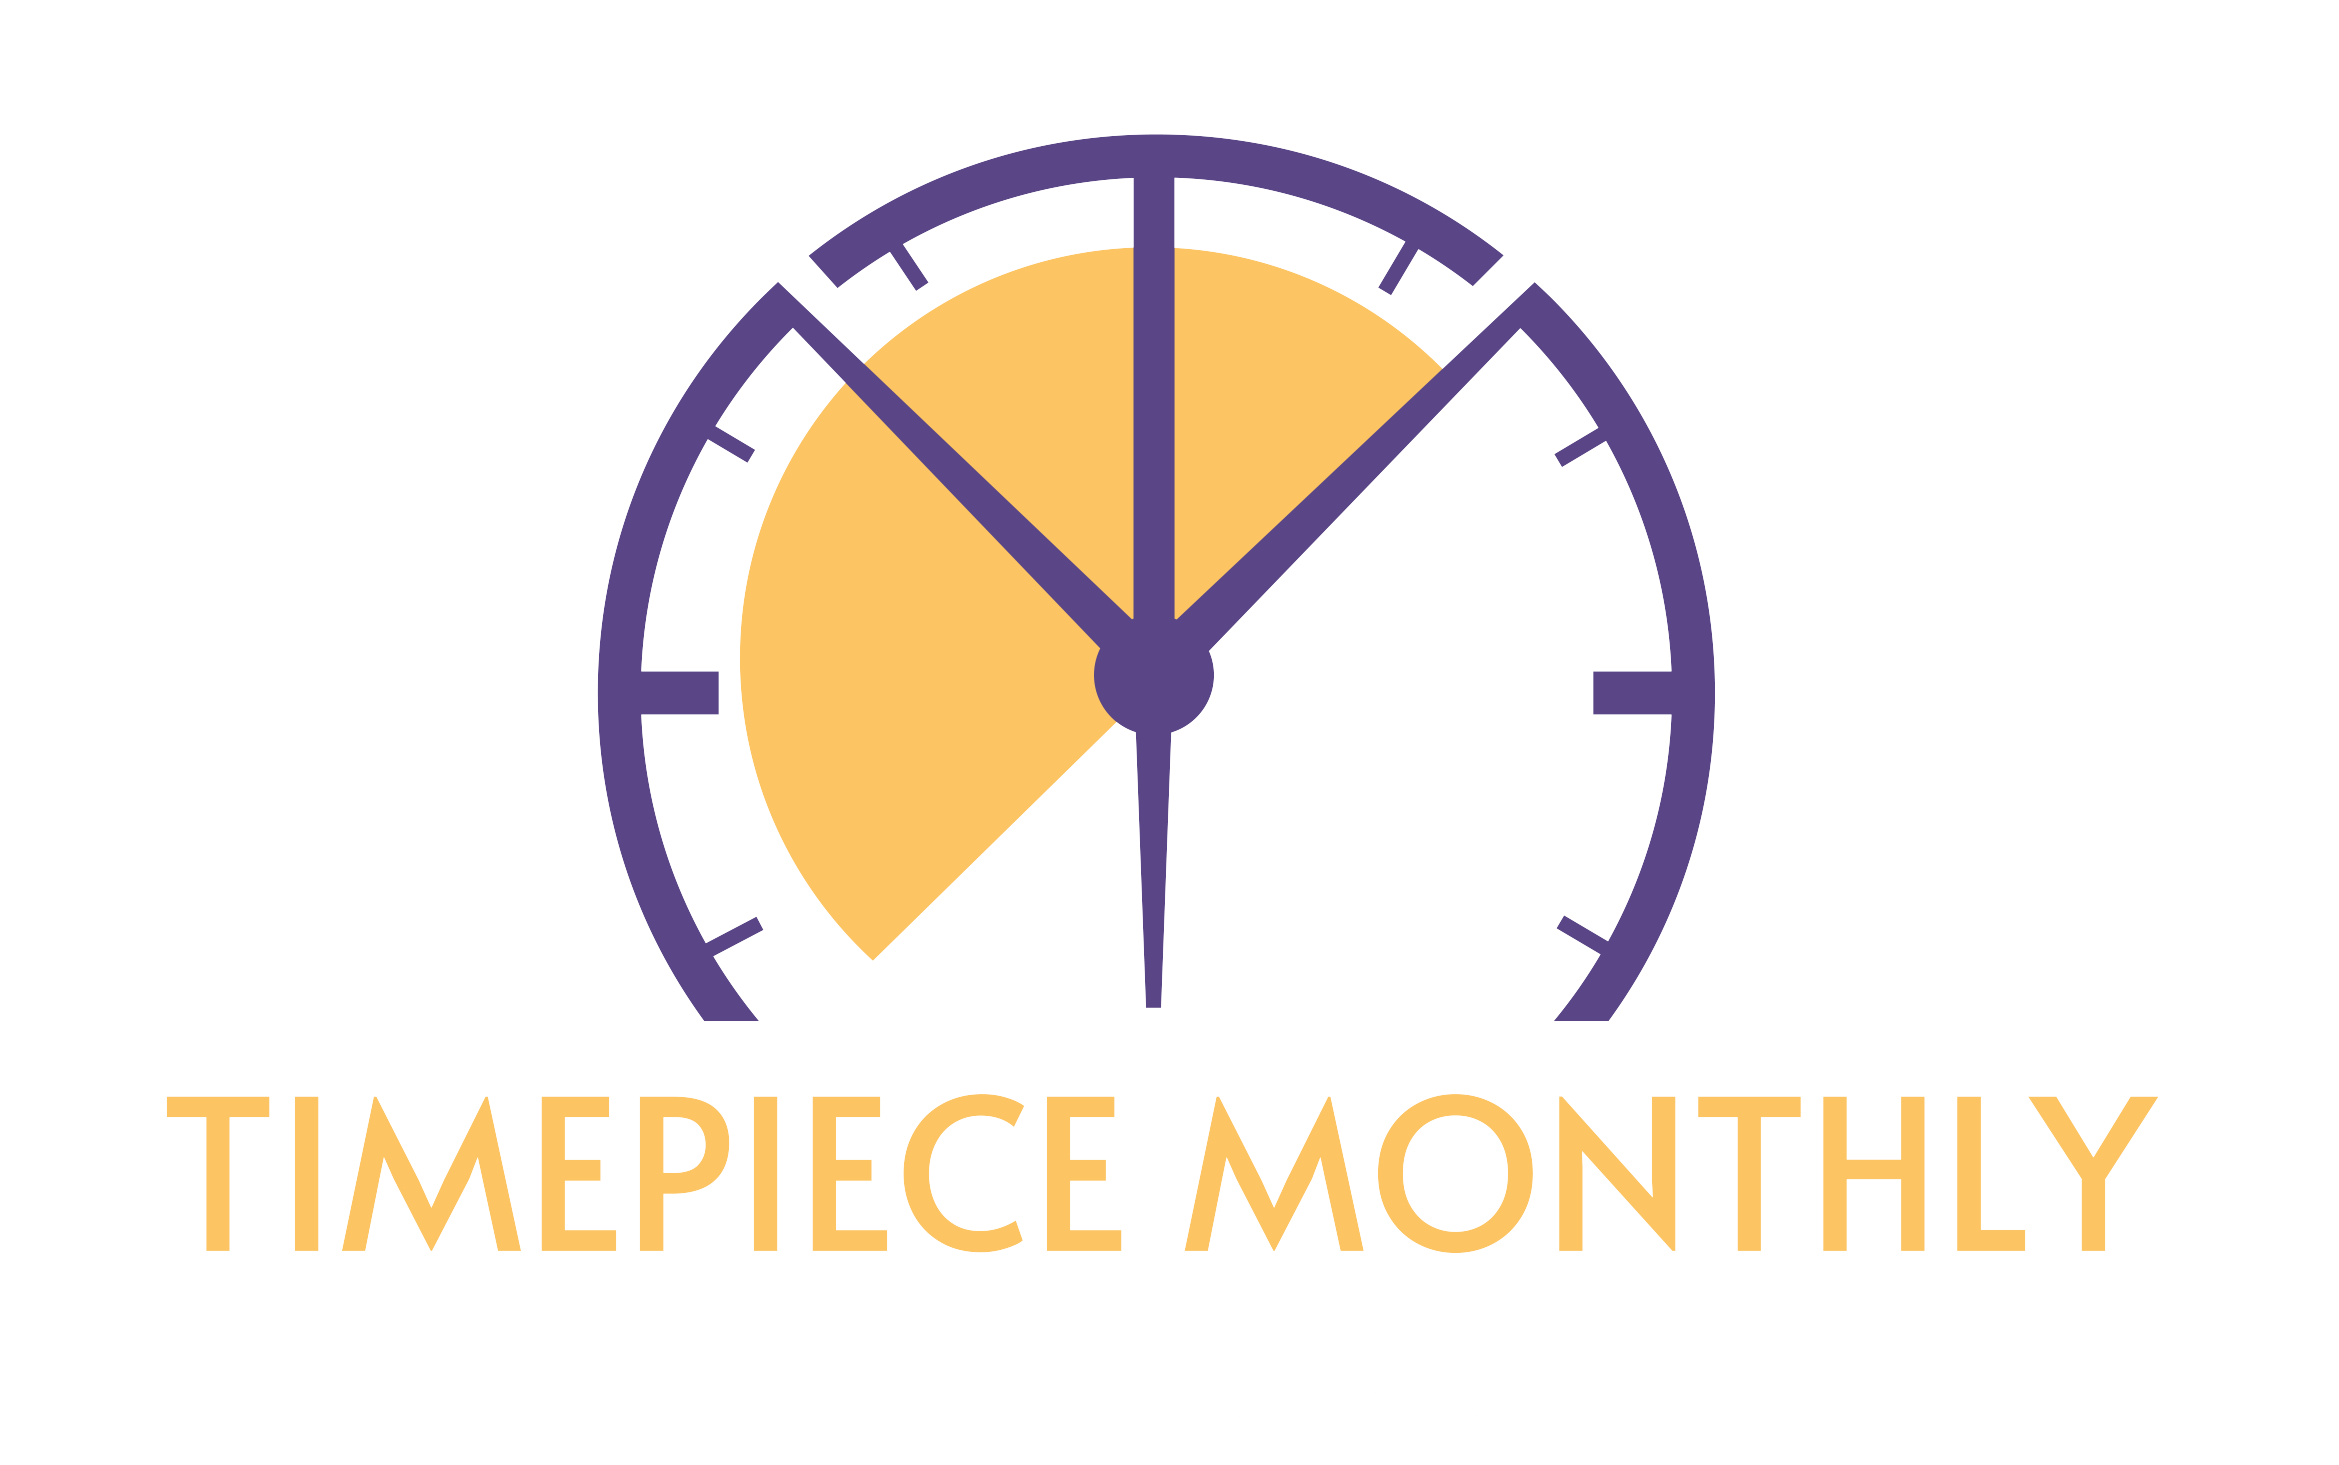 Timepiece Monthly